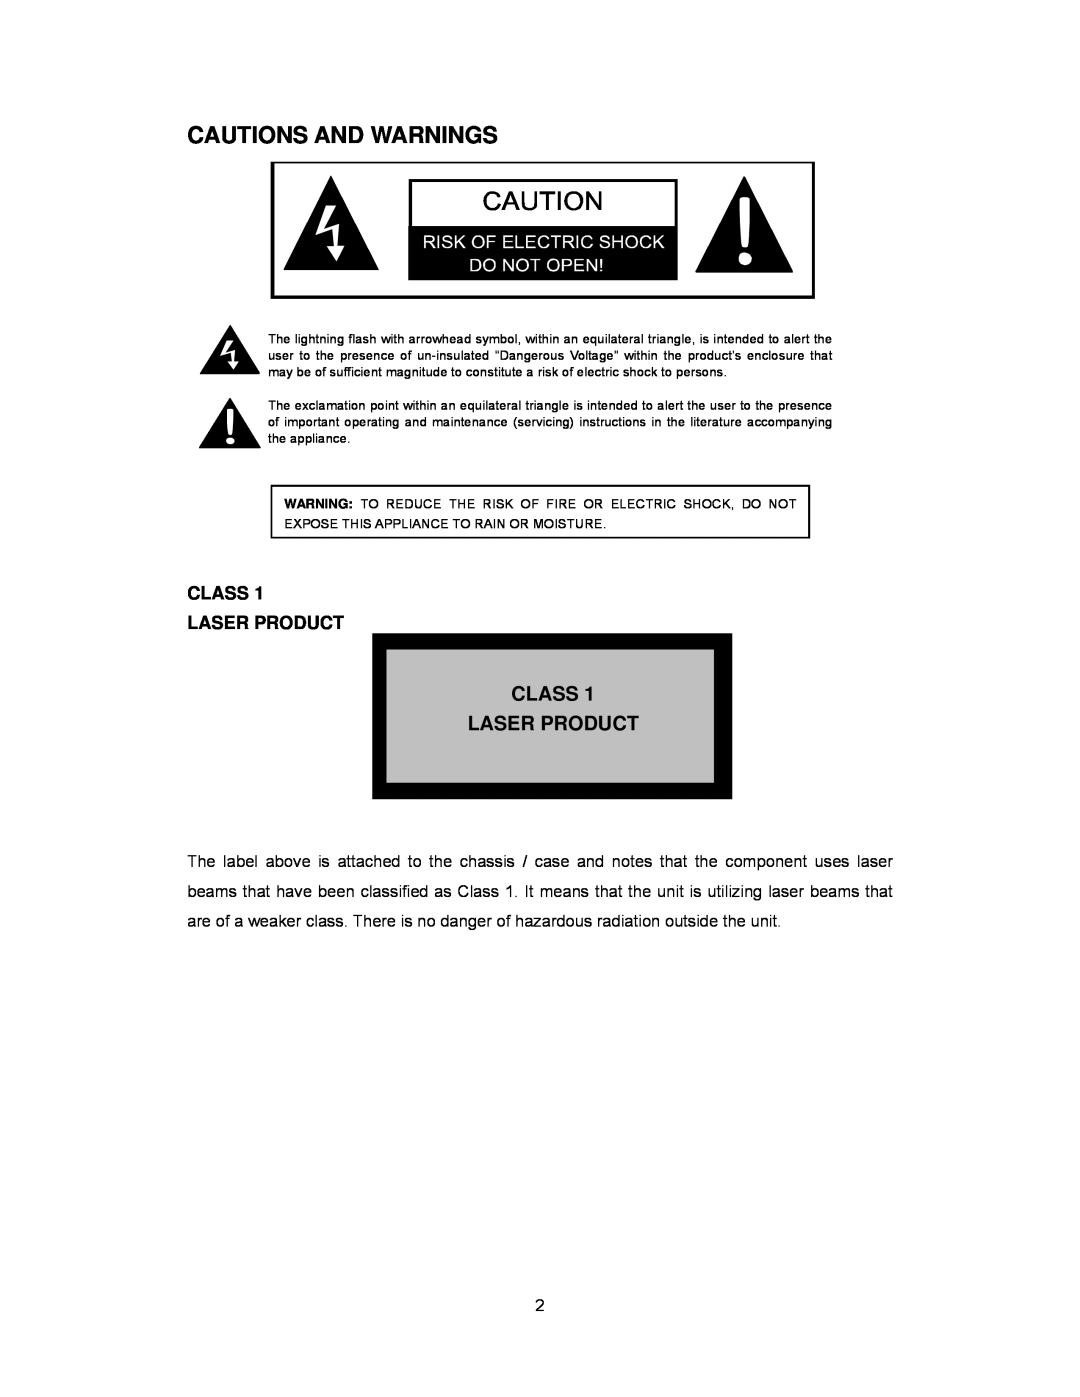 Audiovox PAV2000DTV manual Cautions And Warnings, Class Laser Product 